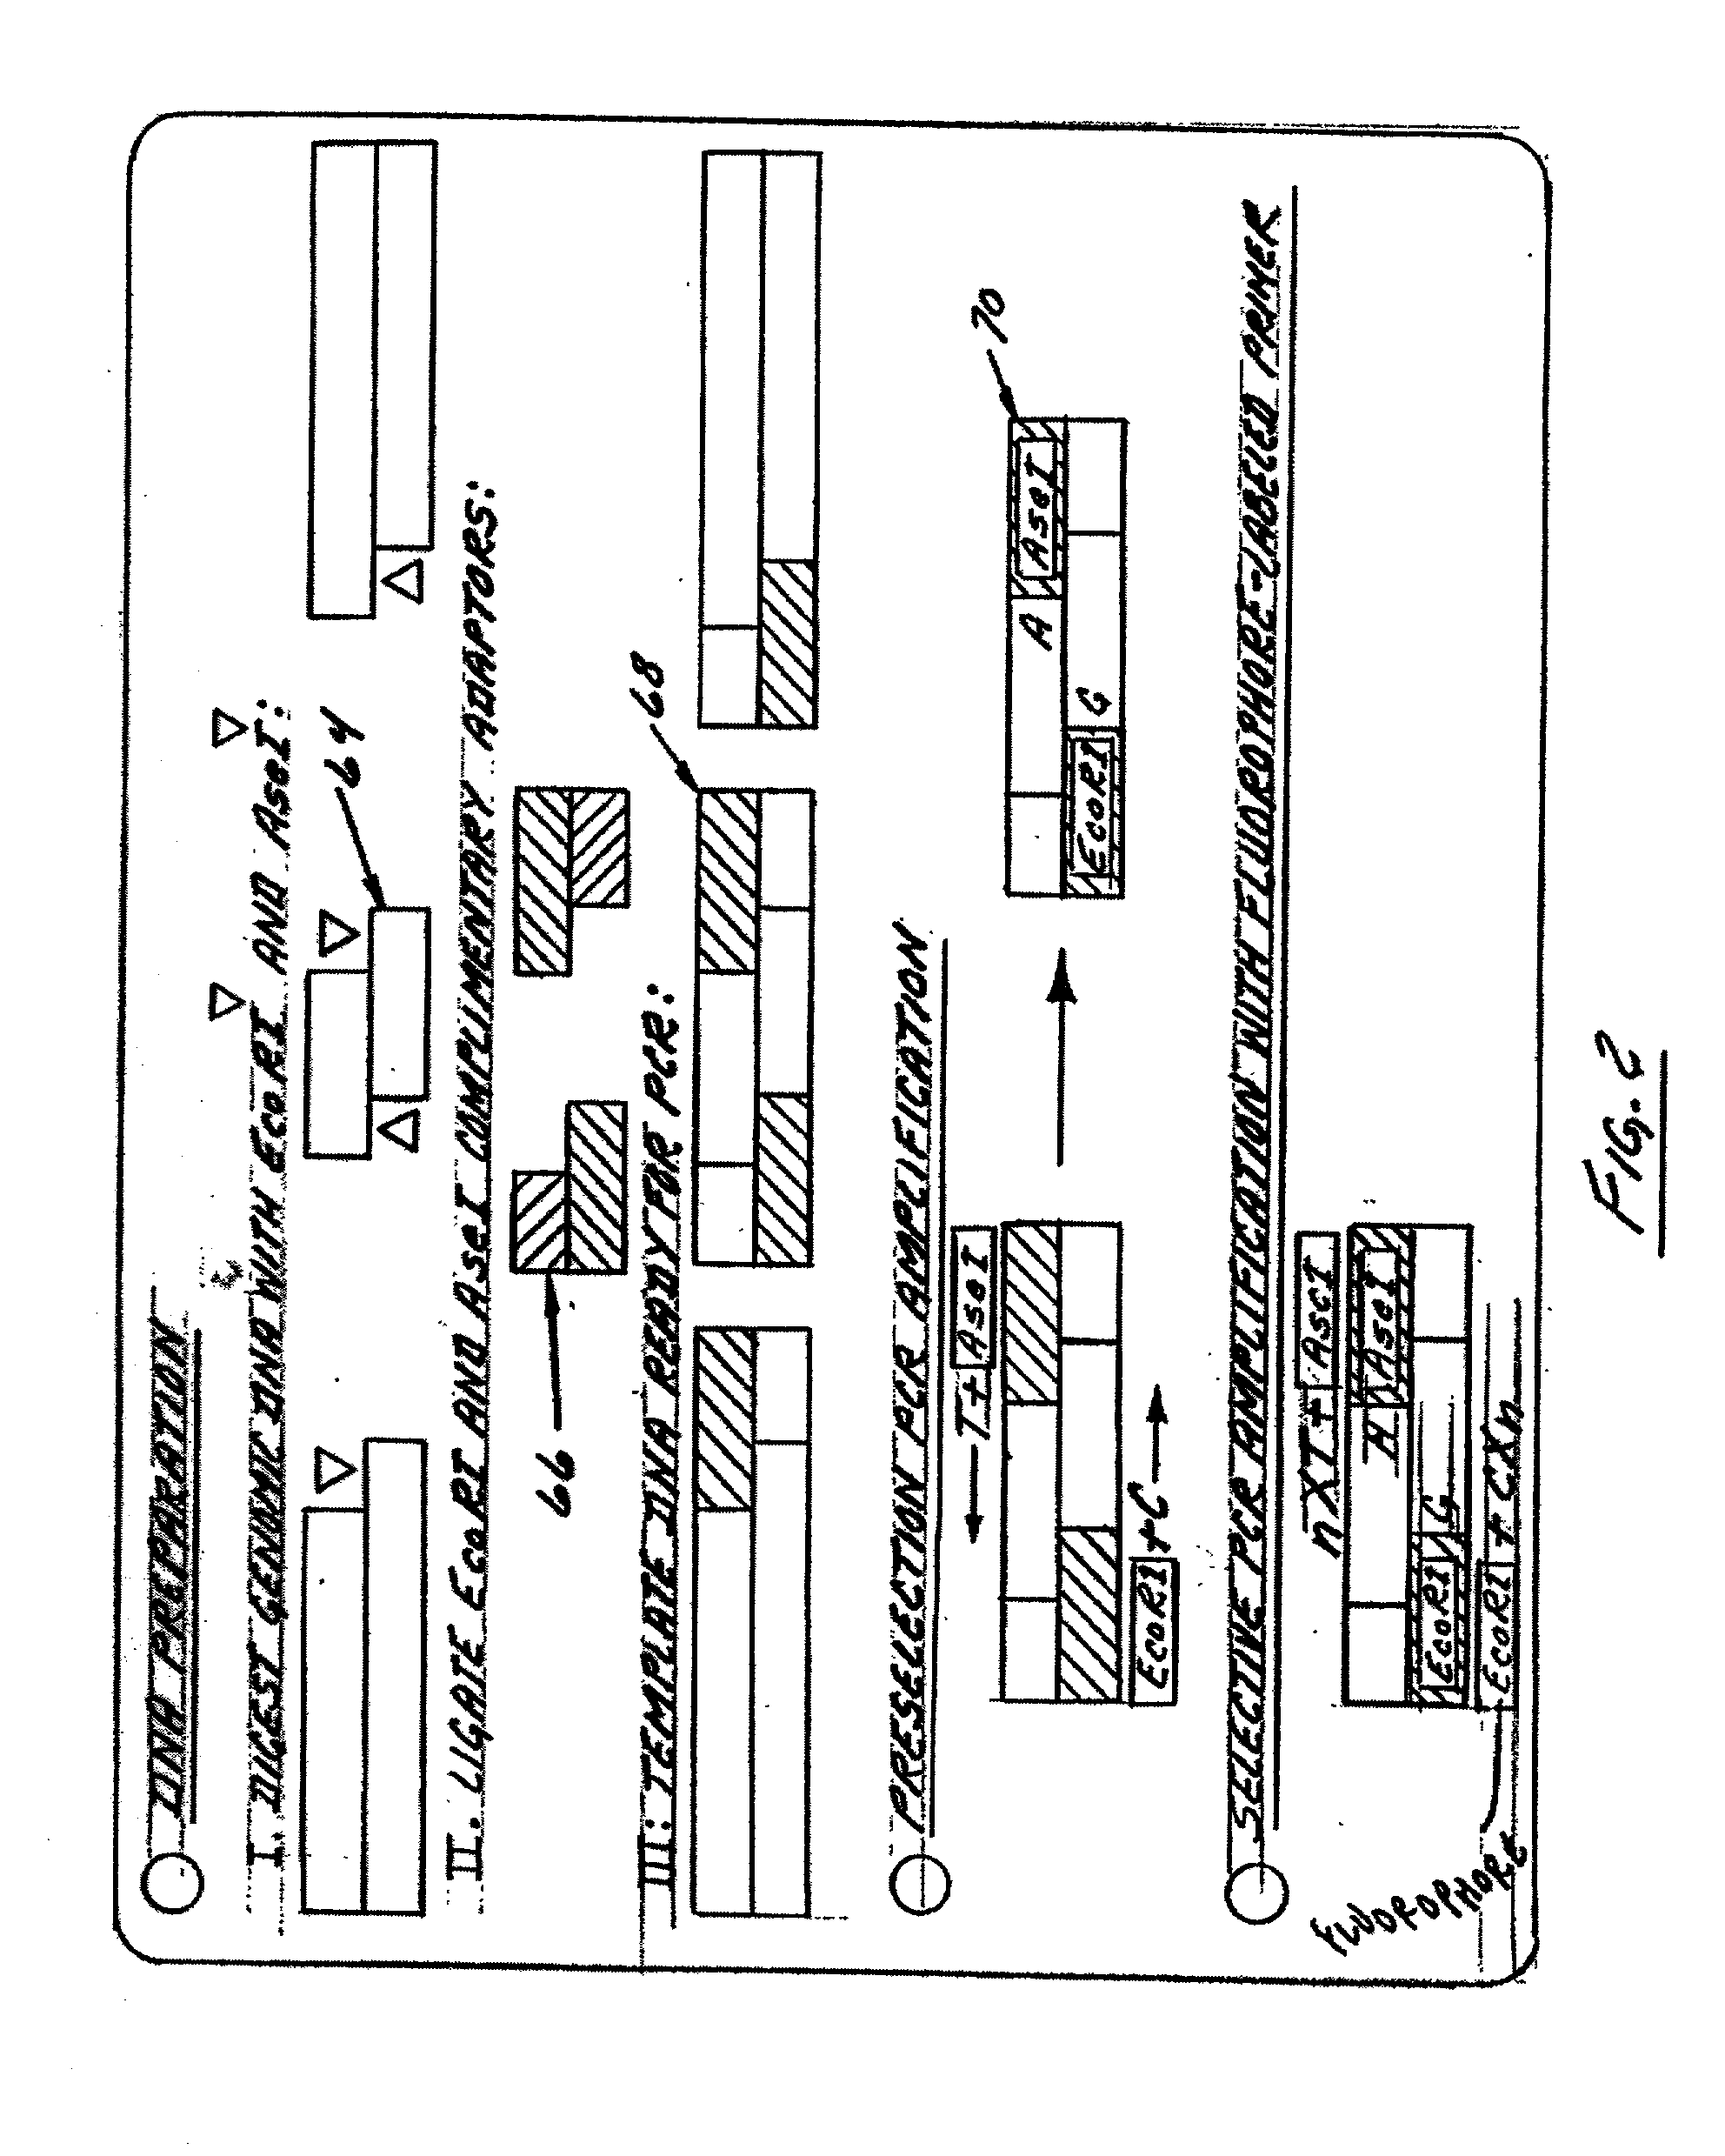 Method of genotyping by determination of allele copy number